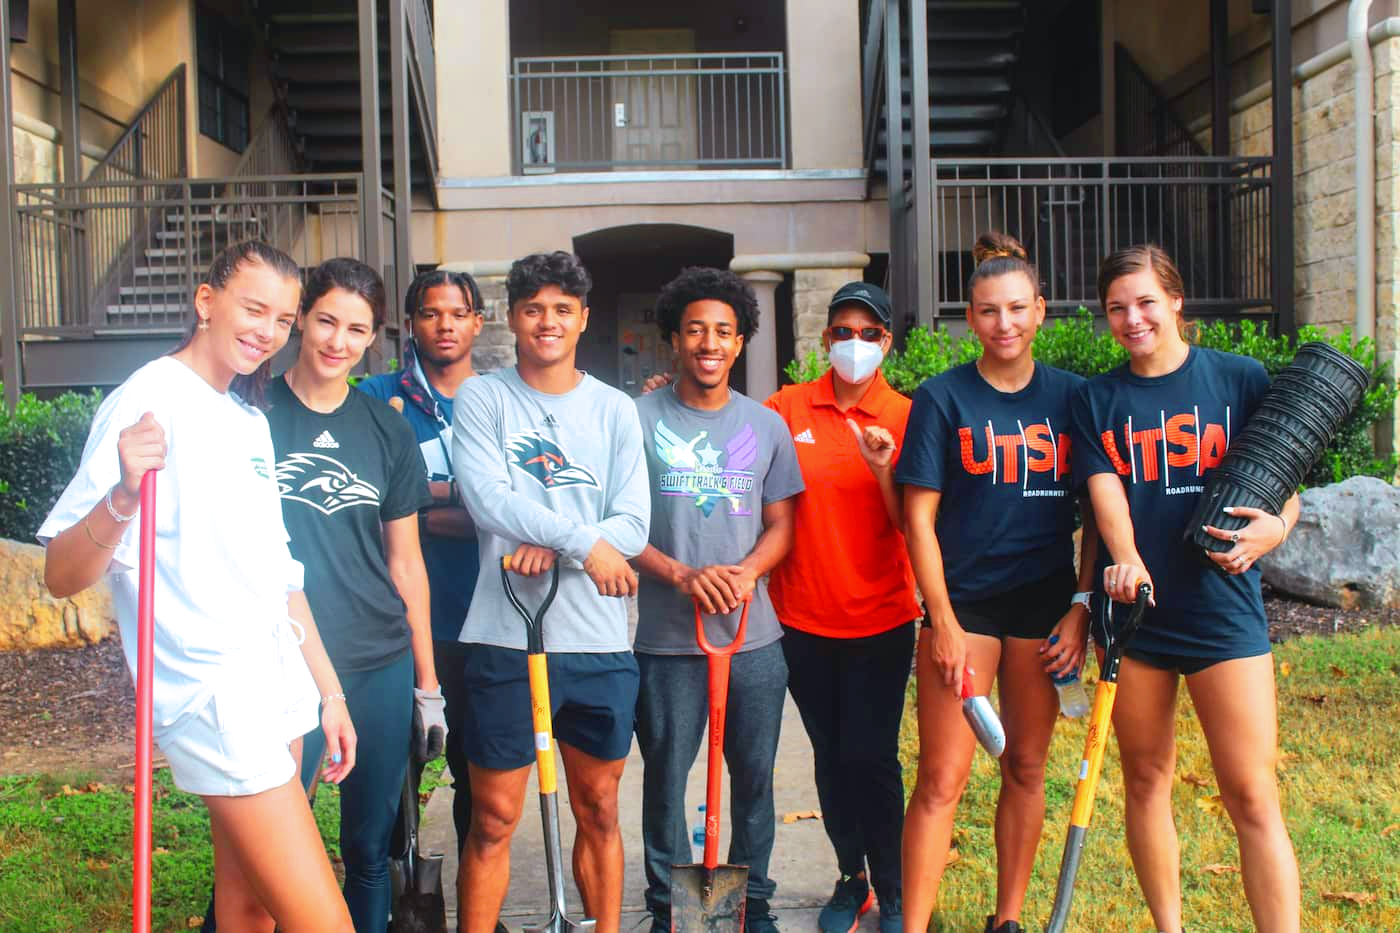 Students at a Service Project holding shovels